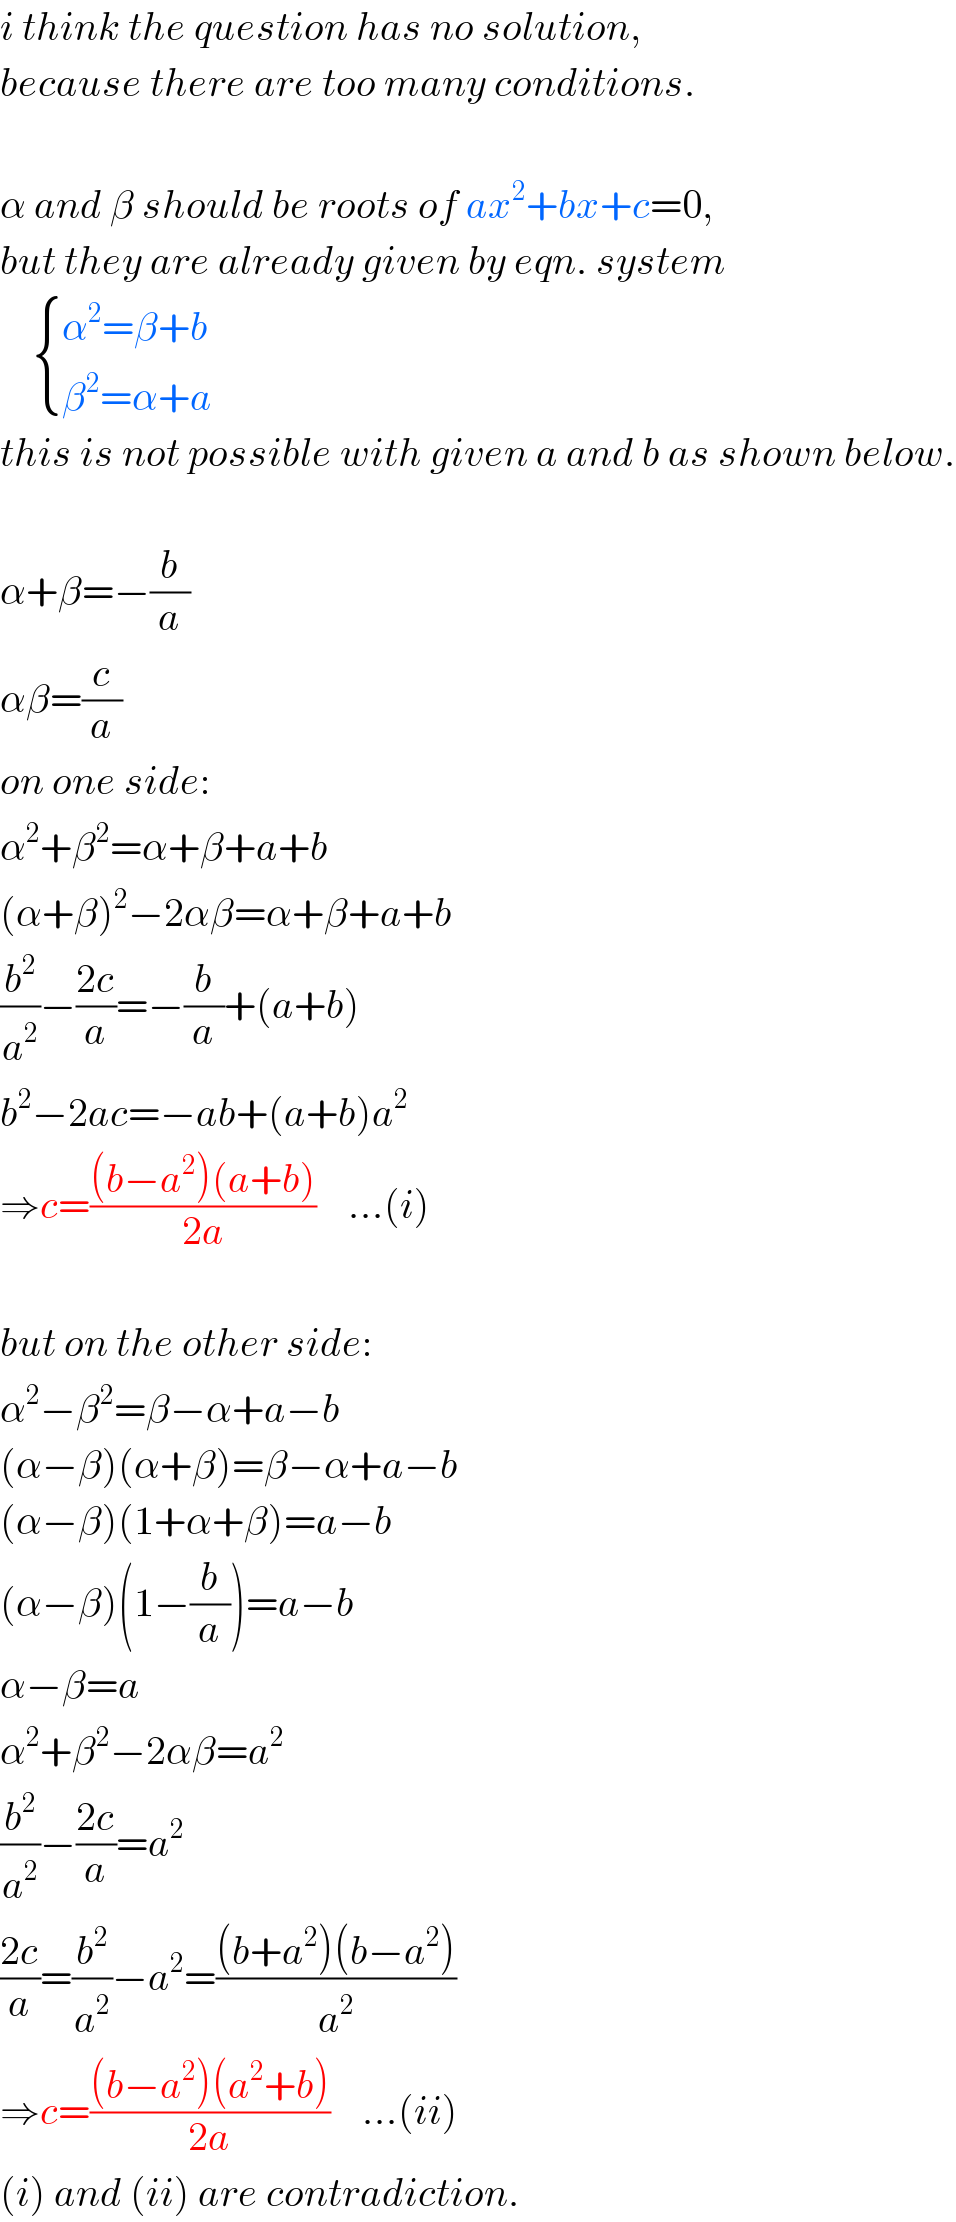 i think the question has no solution,  because there are too many conditions.    α and β should be roots of ax^2 +bx+c=0,  but they are already given by eqn. system       { ((α^2 =β+b)),((β^2 =α+a)) :}  this is not possible with given a and b as shown below.    α+β=−(b/a)  αβ=(c/a)  on one side:  α^2 +β^2 =α+β+a+b  (α+β)^2 −2αβ=α+β+a+b  (b^2 /a^2 )−((2c)/a)=−(b/a)+(a+b)  b^2 −2ac=−ab+(a+b)a^2   ⇒c=(((b−a^2 )(a+b))/(2a))    ...(i)    but on the other side:  α^2 −β^2 =β−α+a−b  (α−β)(α+β)=β−α+a−b  (α−β)(1+α+β)=a−b  (α−β)(1−(b/a))=a−b  α−β=a  α^2 +β^2 −2αβ=a^2   (b^2 /a^2 )−((2c)/a)=a^2   ((2c)/a)=(b^2 /a^2 )−a^2 =(((b+a^2 )(b−a^2 ))/a^2 )  ⇒c=(((b−a^2 )(a^2 +b))/(2a))    ...(ii)  (i) and (ii) are contradiction.  